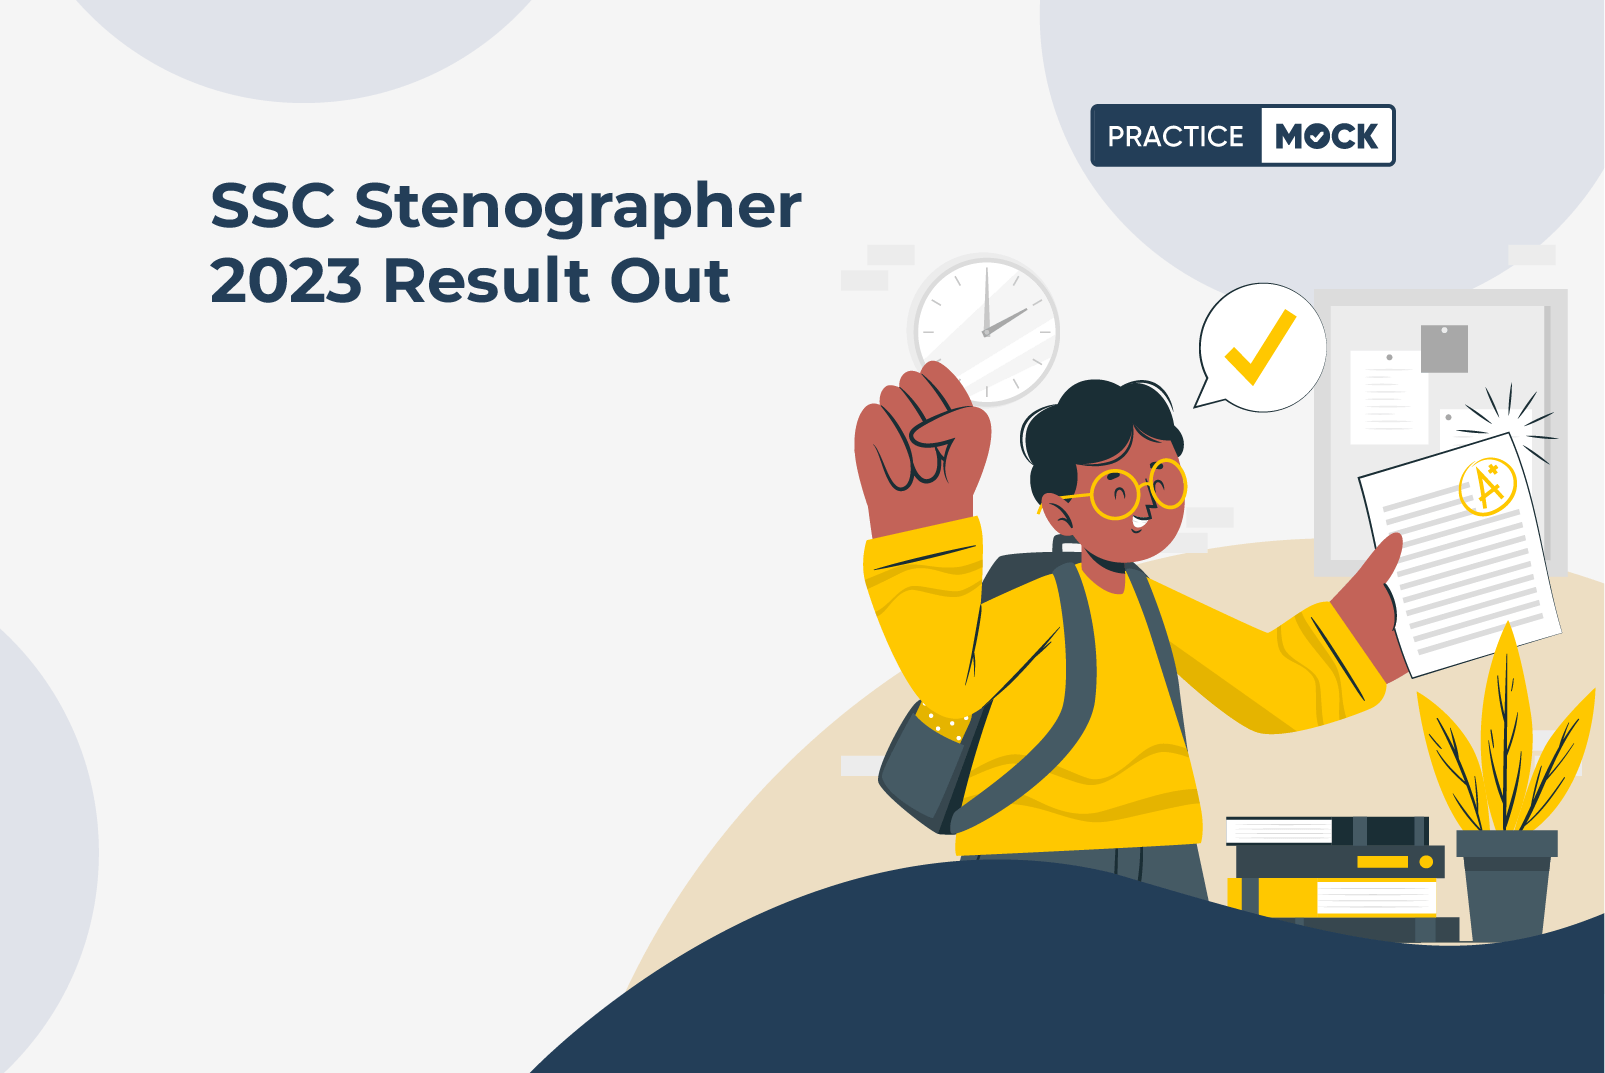 SSC Stenographer 2023 Result Out